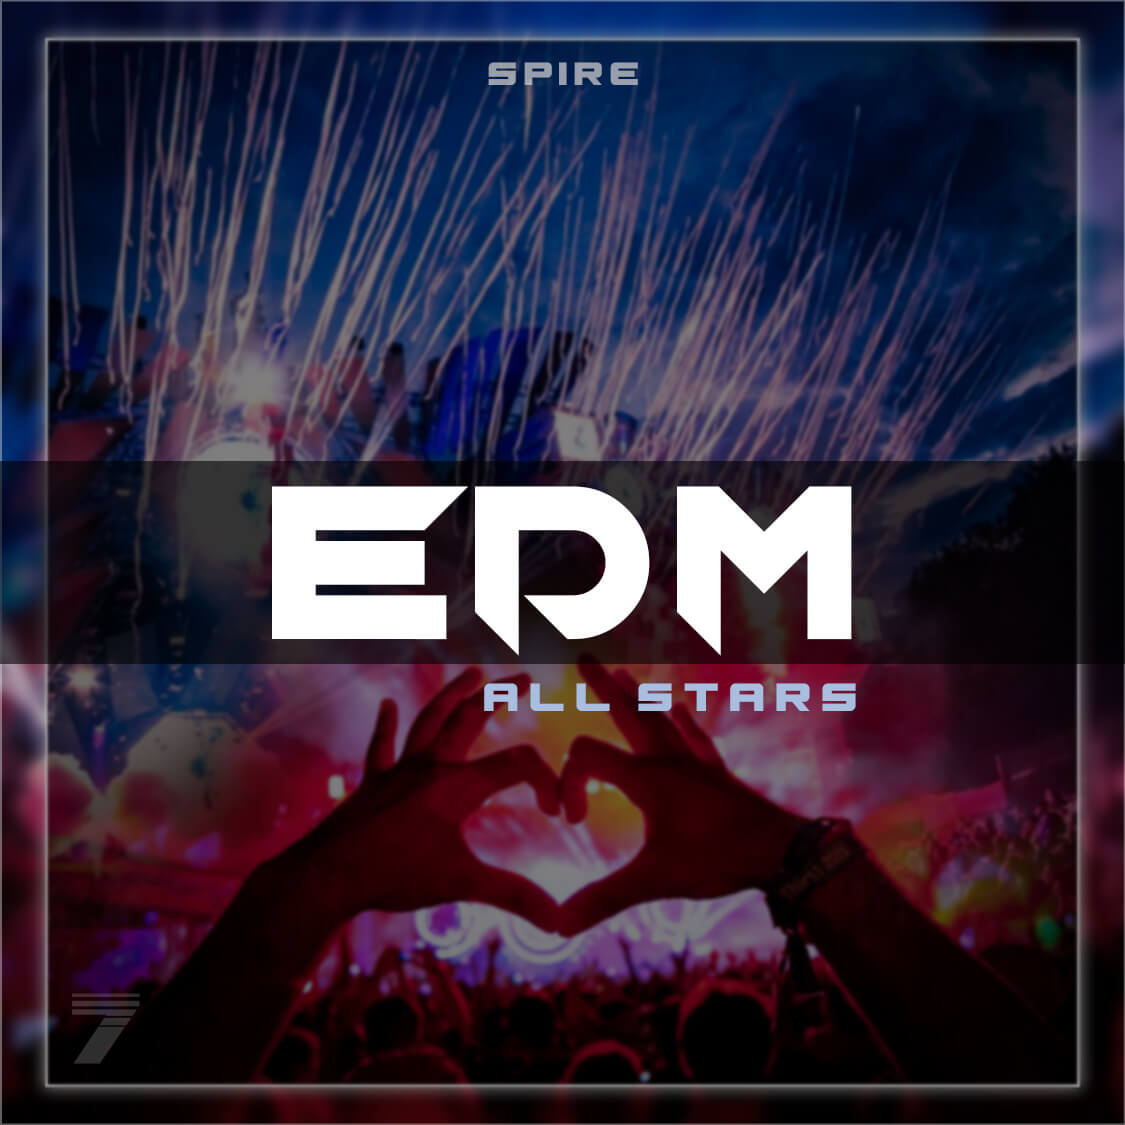 edm presets for reveal sound spire bringing you the sounds of Hardwell, Alesso and Martin Garrix we bring you 64 Premium Spire EDM presets